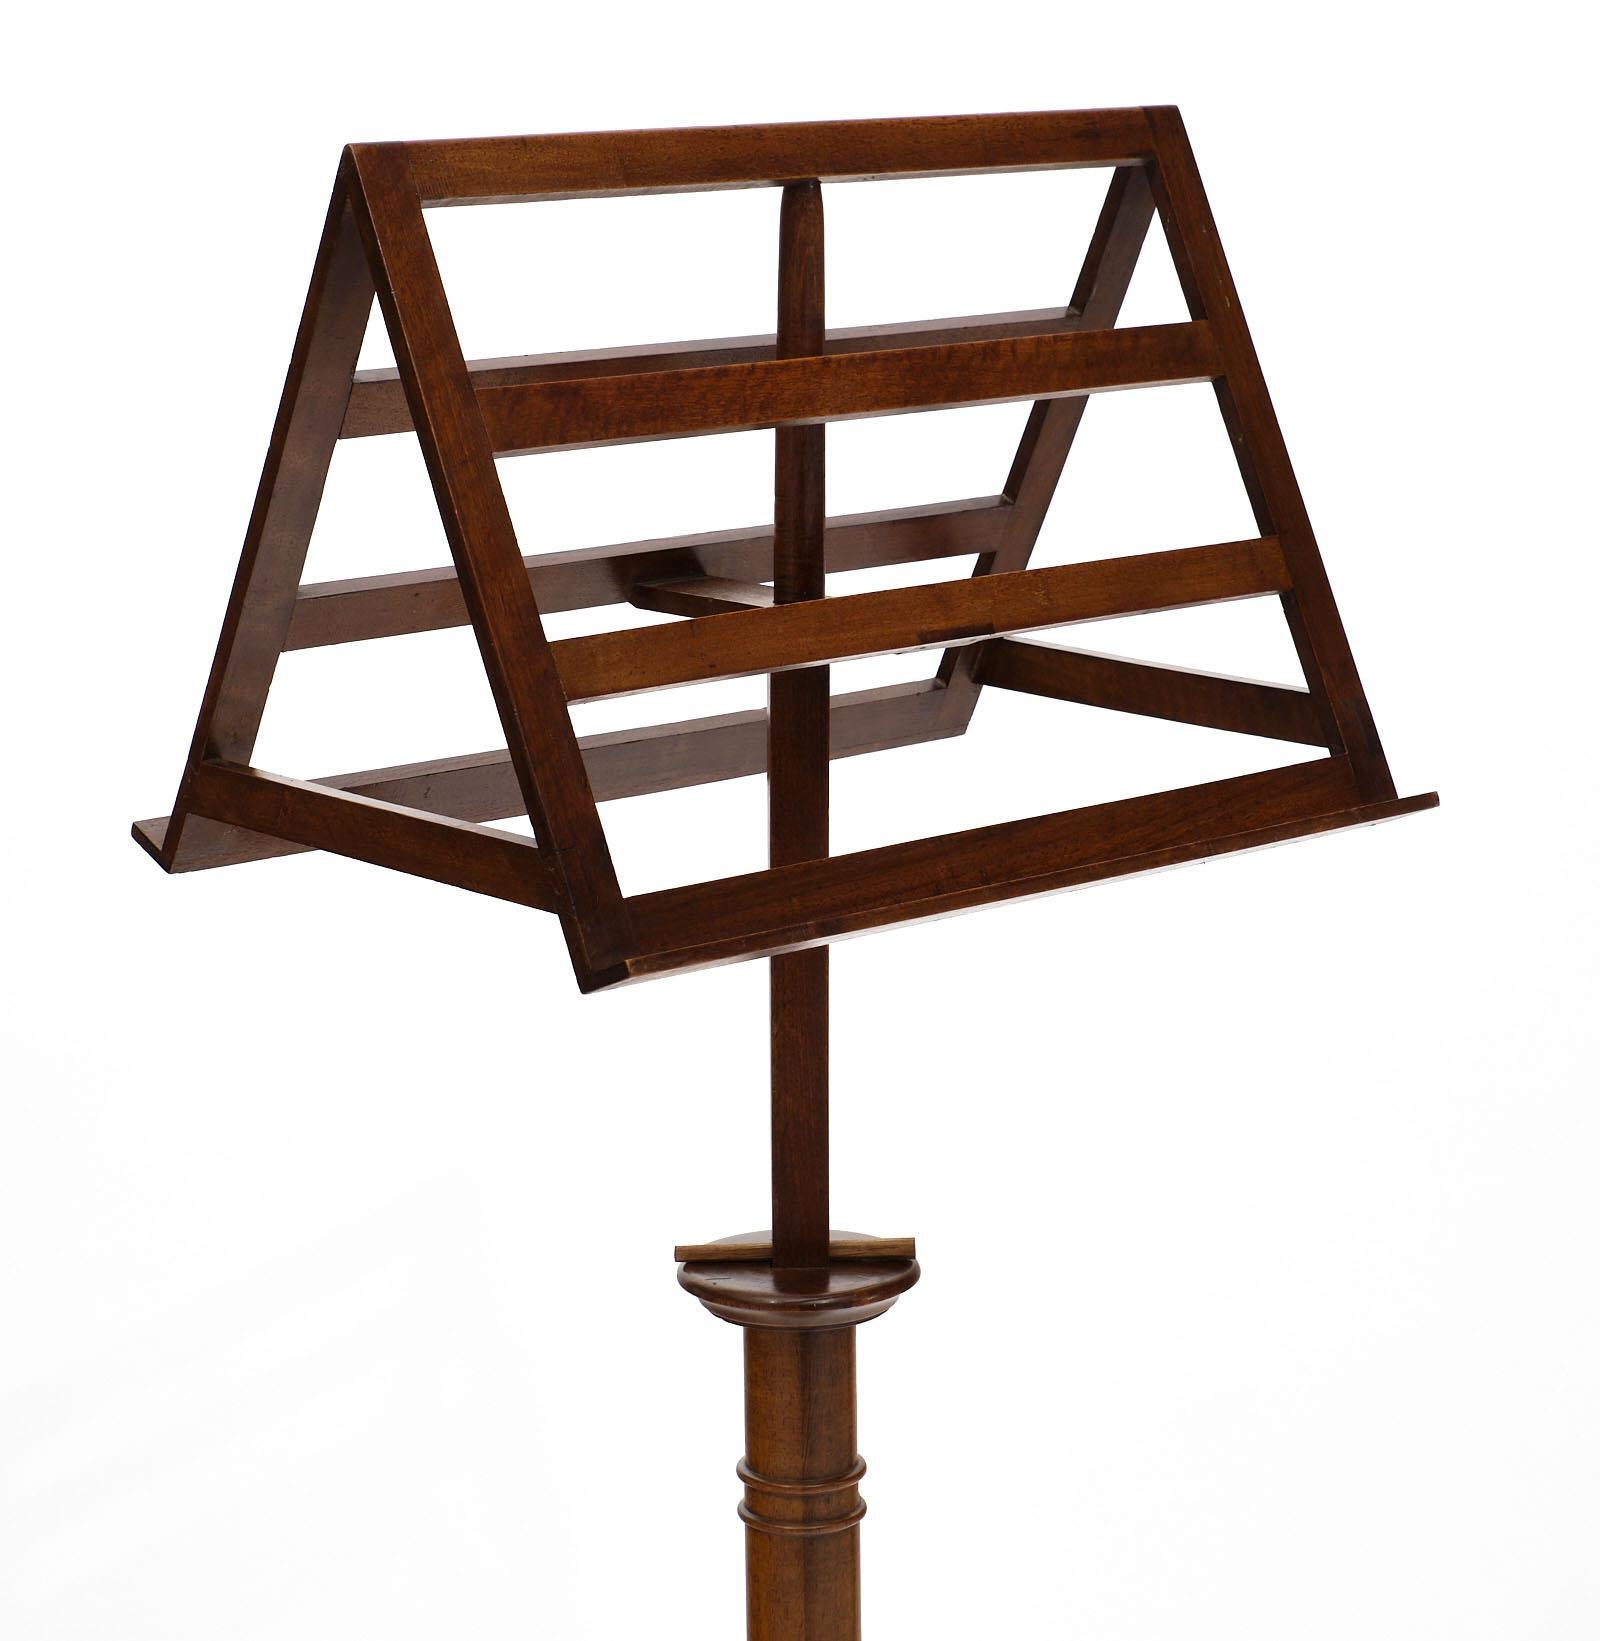 19th century French walnut lectern featuring a rotating stand on an adjustable stem. The solid walnut is hand carved into a single support resting on four hand carved feet. This is from a private chapel in the Rhone Valley.